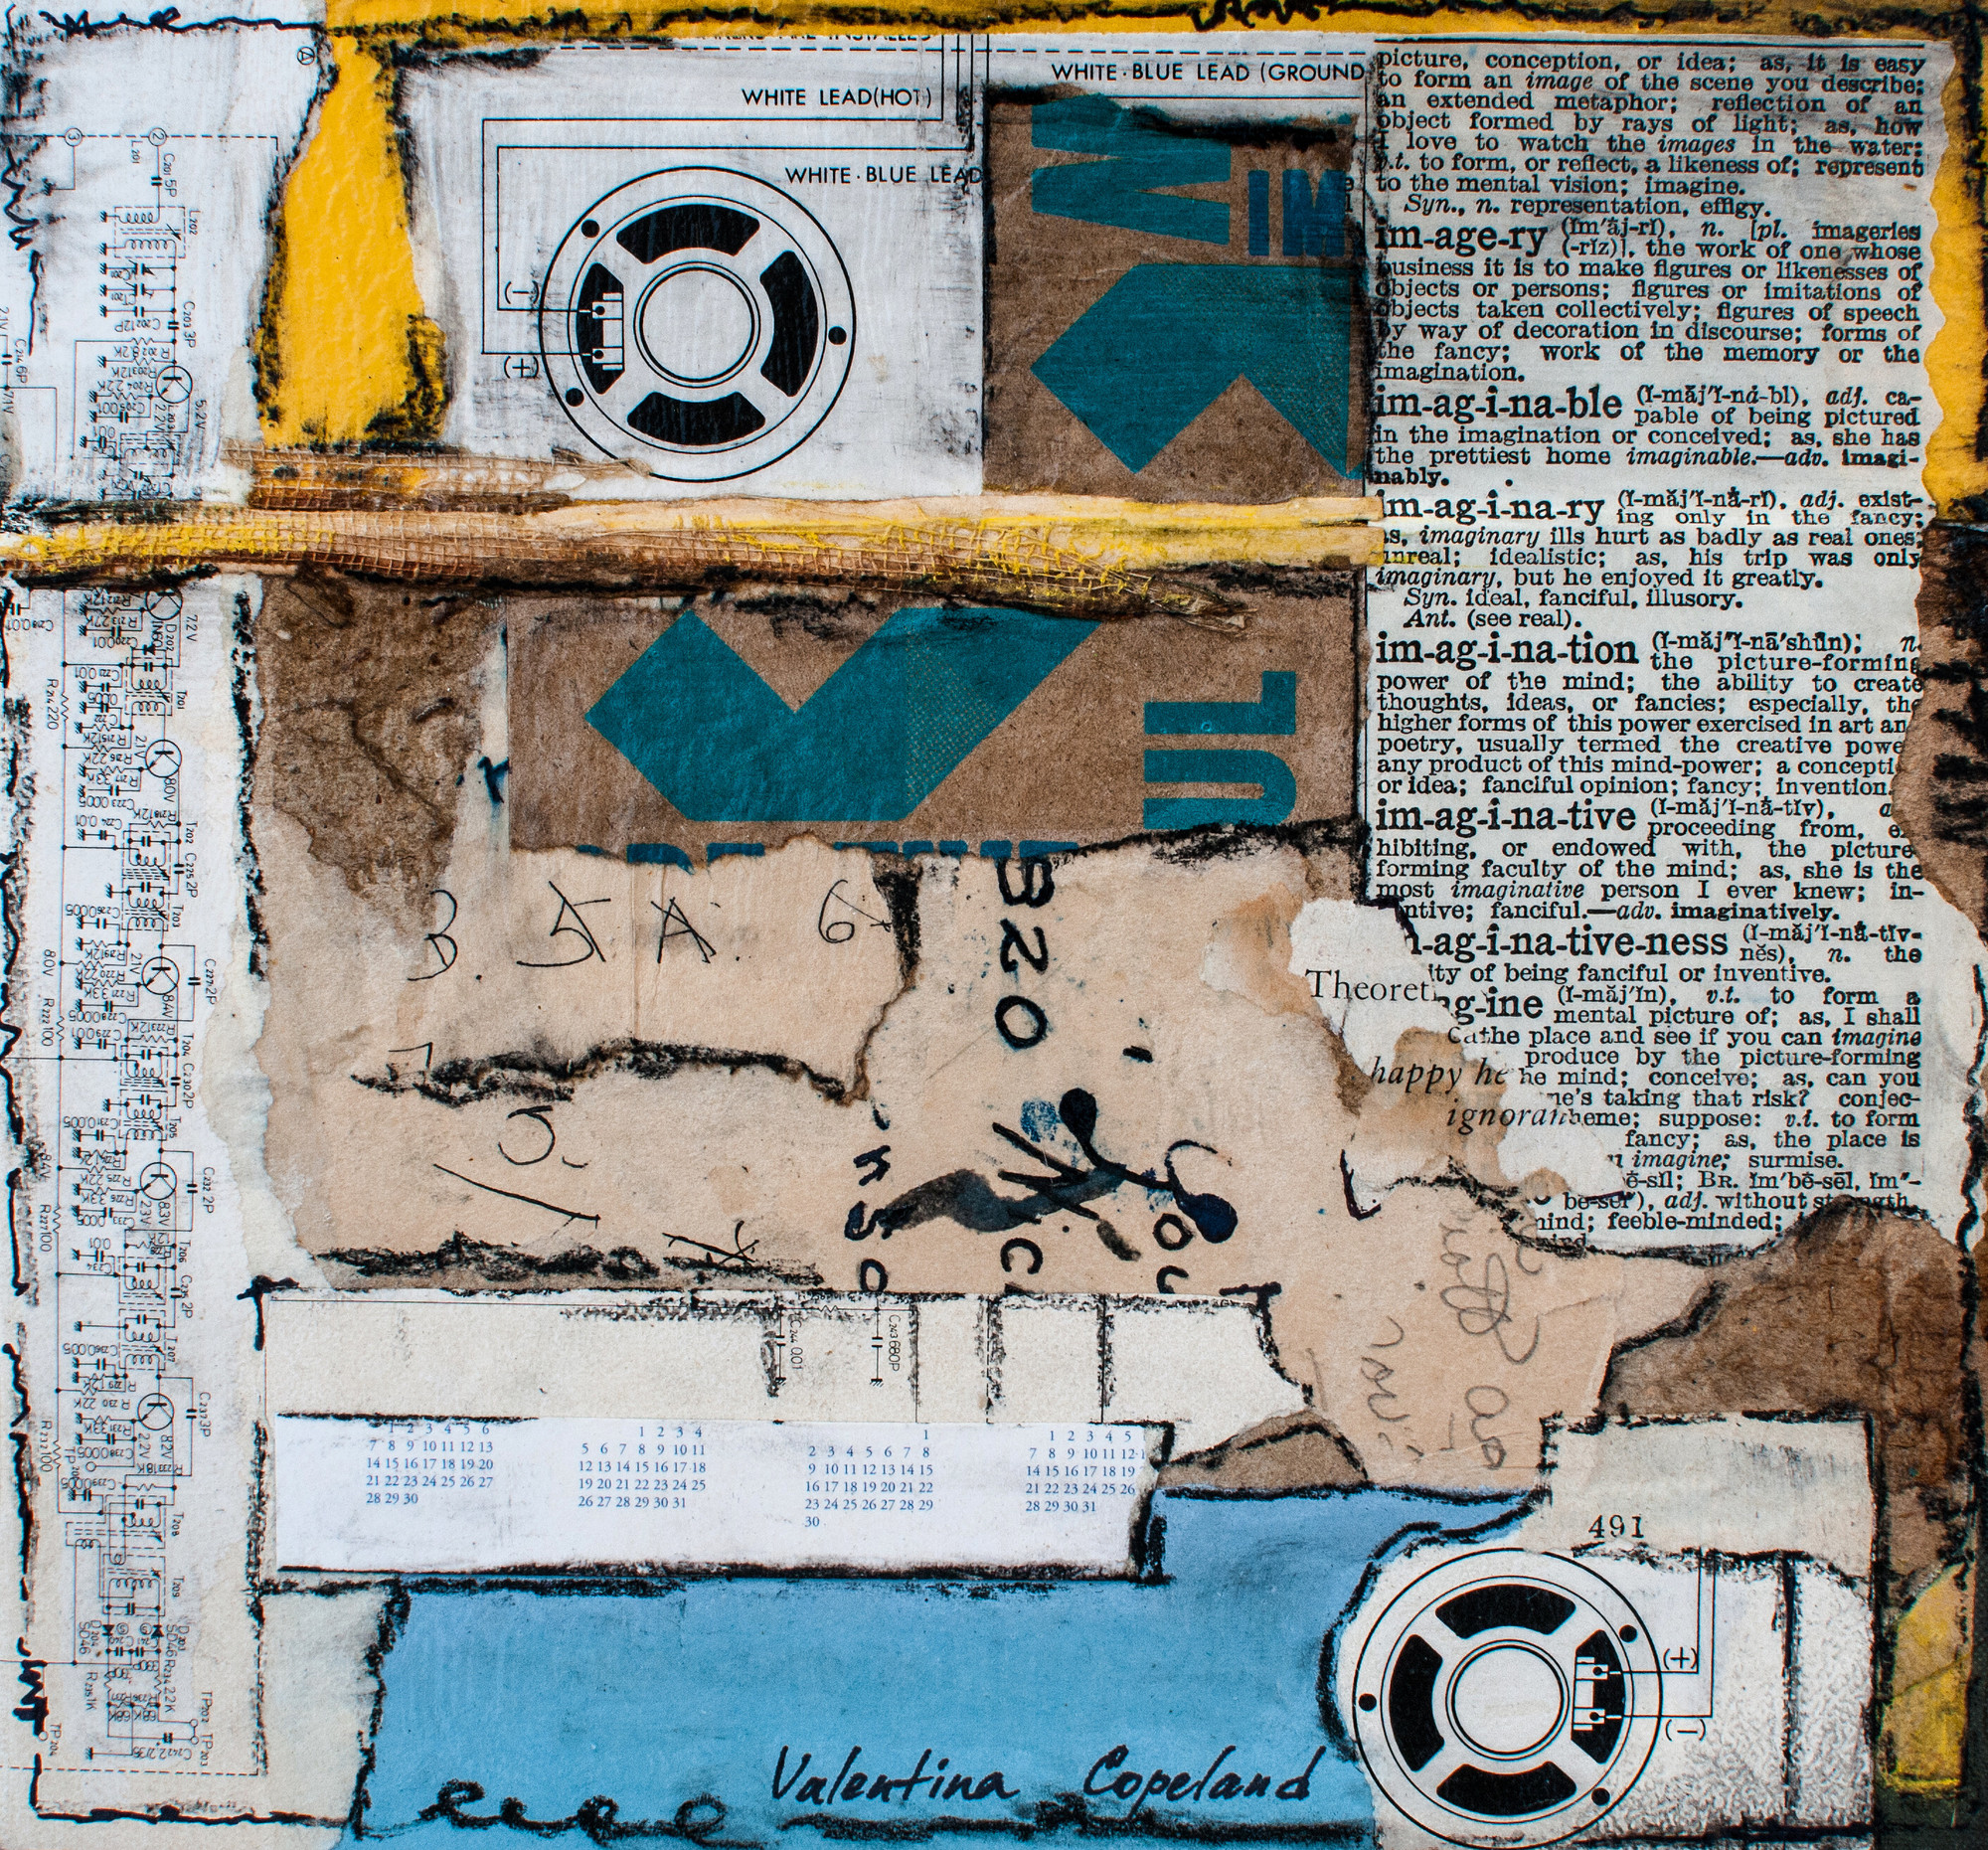 Power Of The Mind, Valentina Copeland, Mixed Media, Collage, Size: 13x13 in
Price:$200